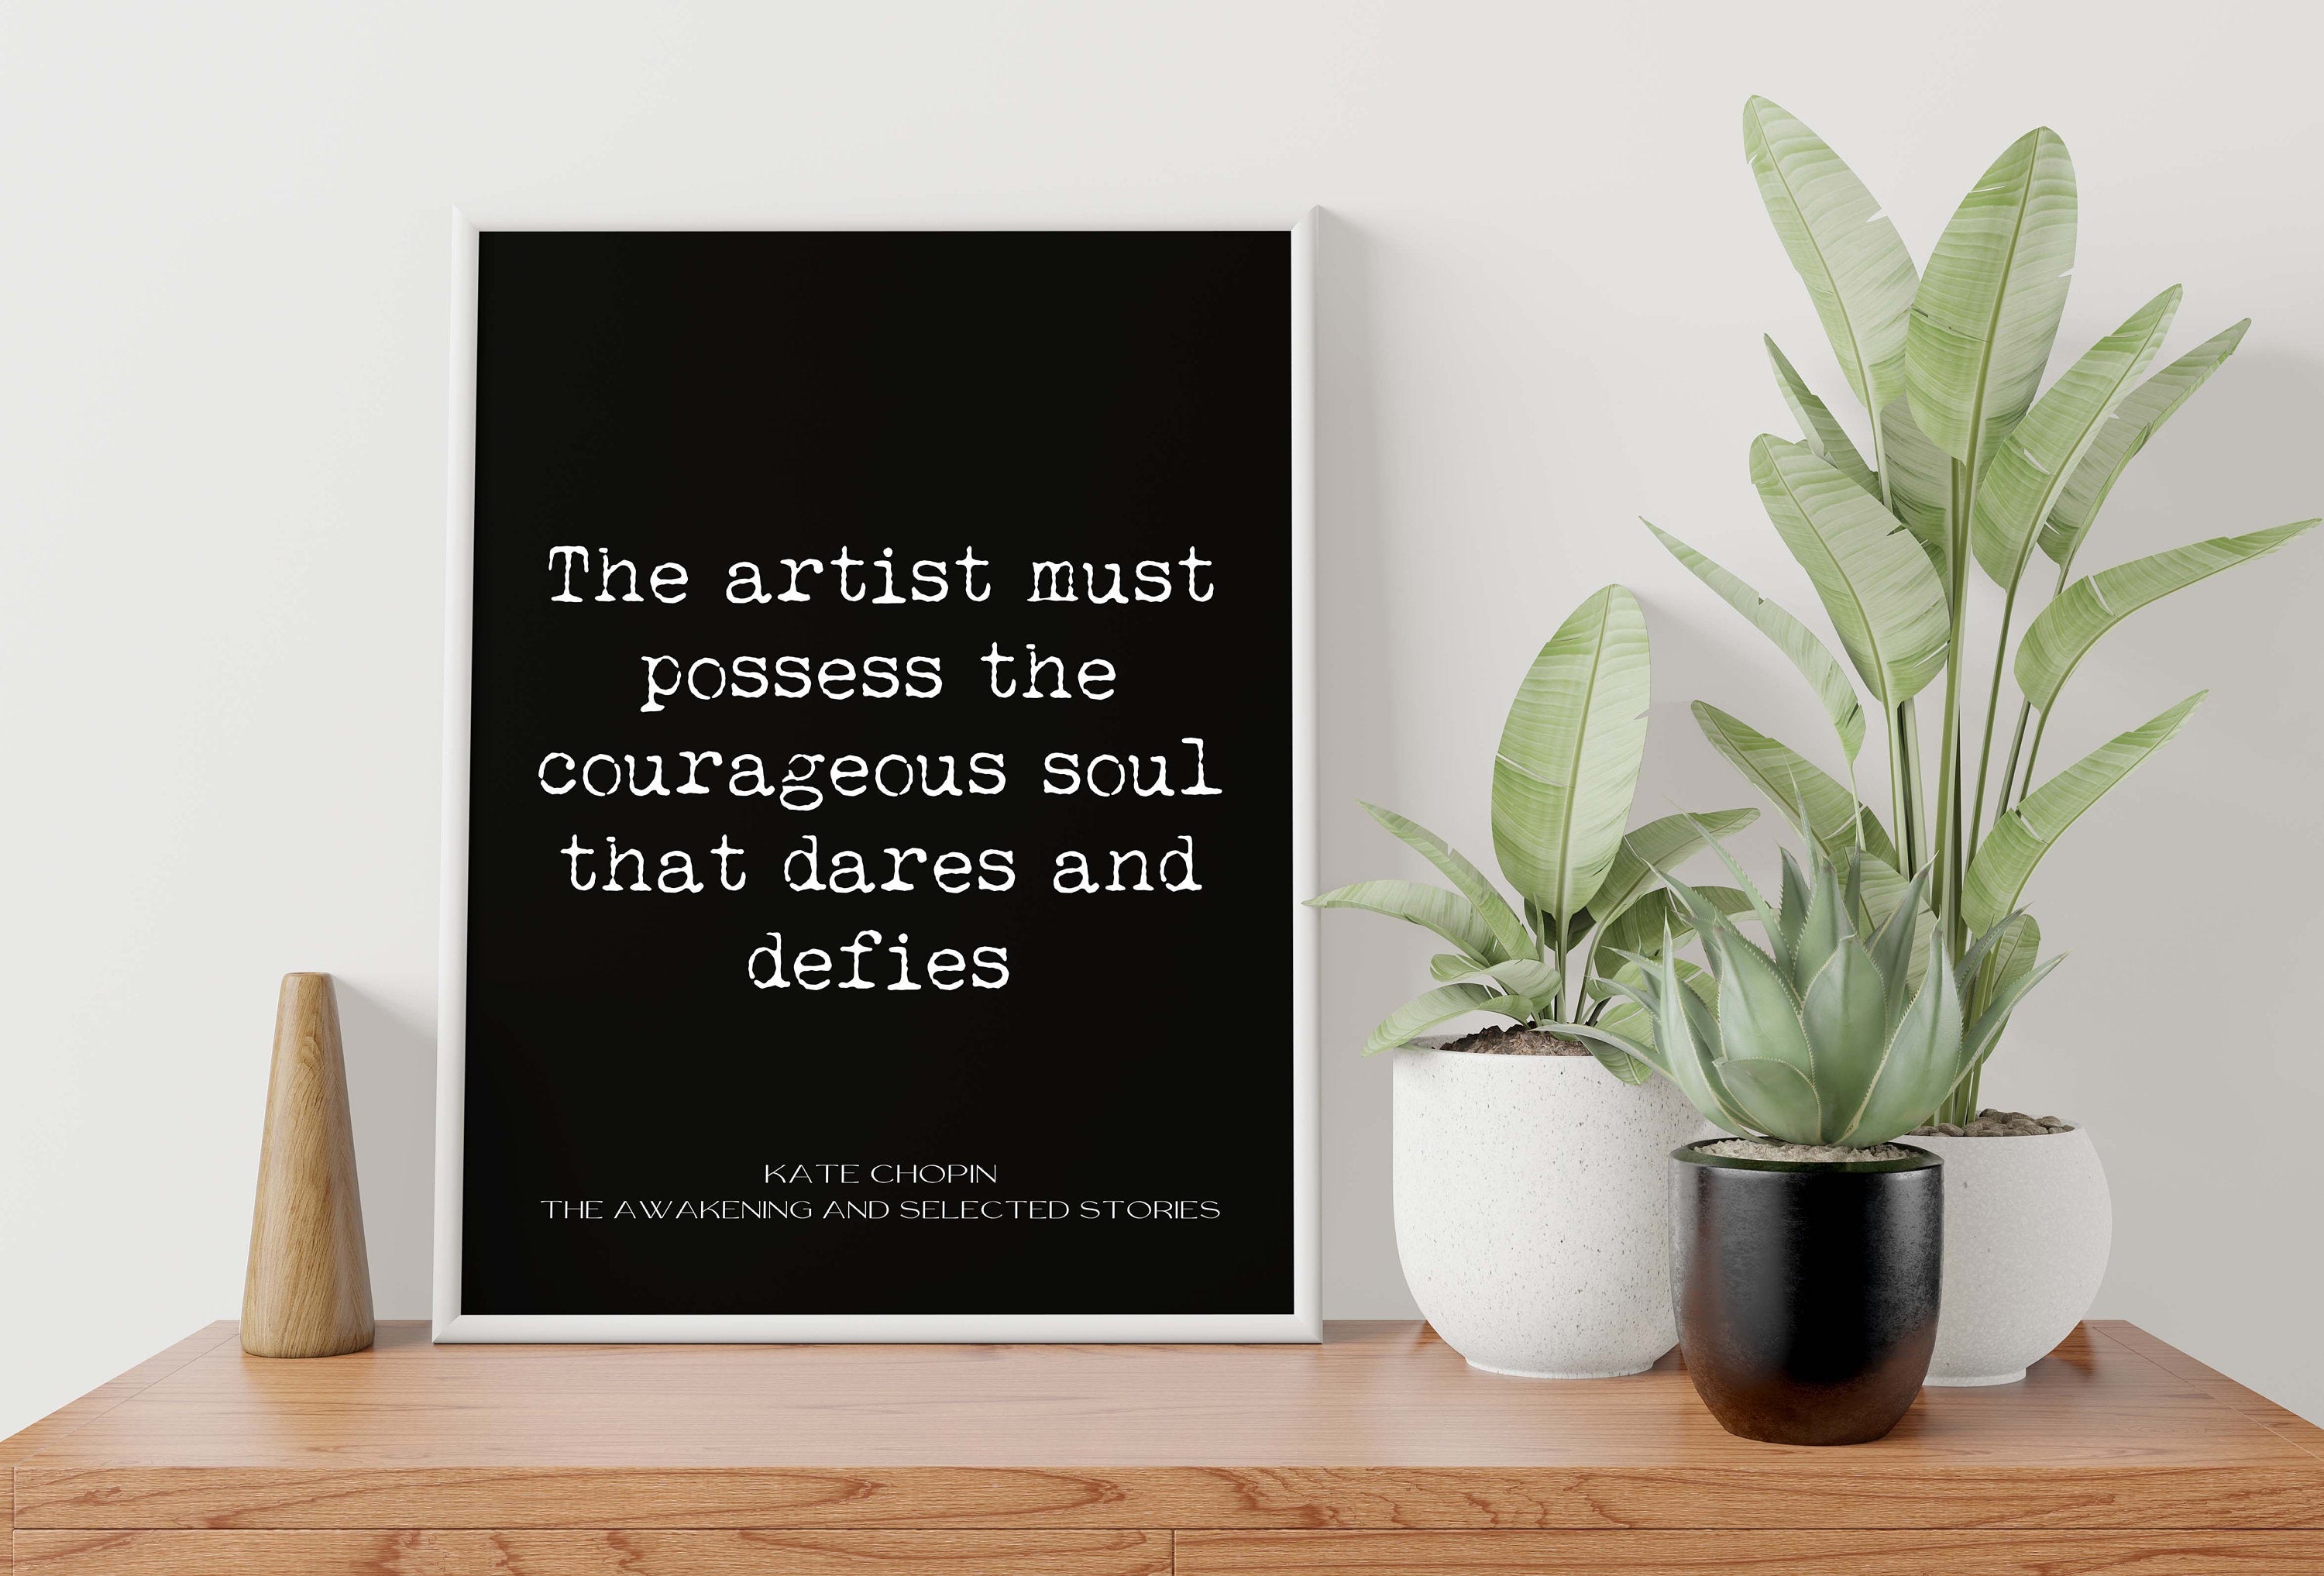 The Awakening Kate Chopin Print, The artist must possess the courageous soul